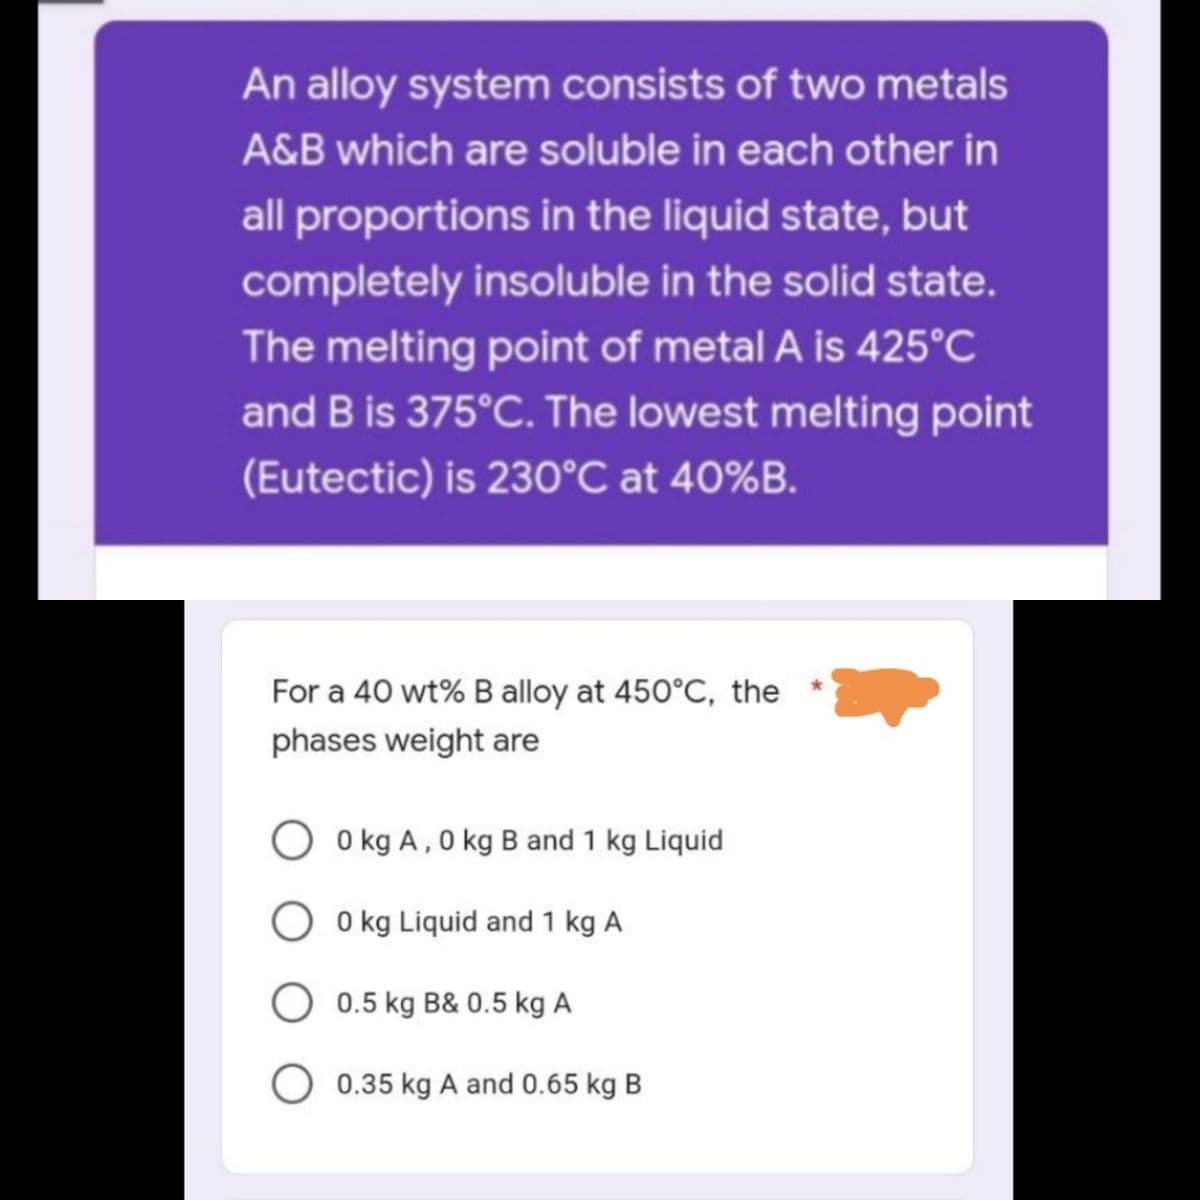 An alloy system consists of two metals
A&B which are soluble in each other in
all proportions in the liquid state, but
completely insoluble in the solid state.
The melting point of metal A is 425°C
and B is 375°C. The lowest melting point
(Eutectic) is 230°C at 40%B.
For a 40 wt% B alloy at 450°C, the
phases weight are
0 kg A, 0 kg B and 1 kg Liquid
0 kg Liquid and 1 kg A
0.5 kg B& 0.5 kg A
O 0.35 kg A and 0.65 kg B